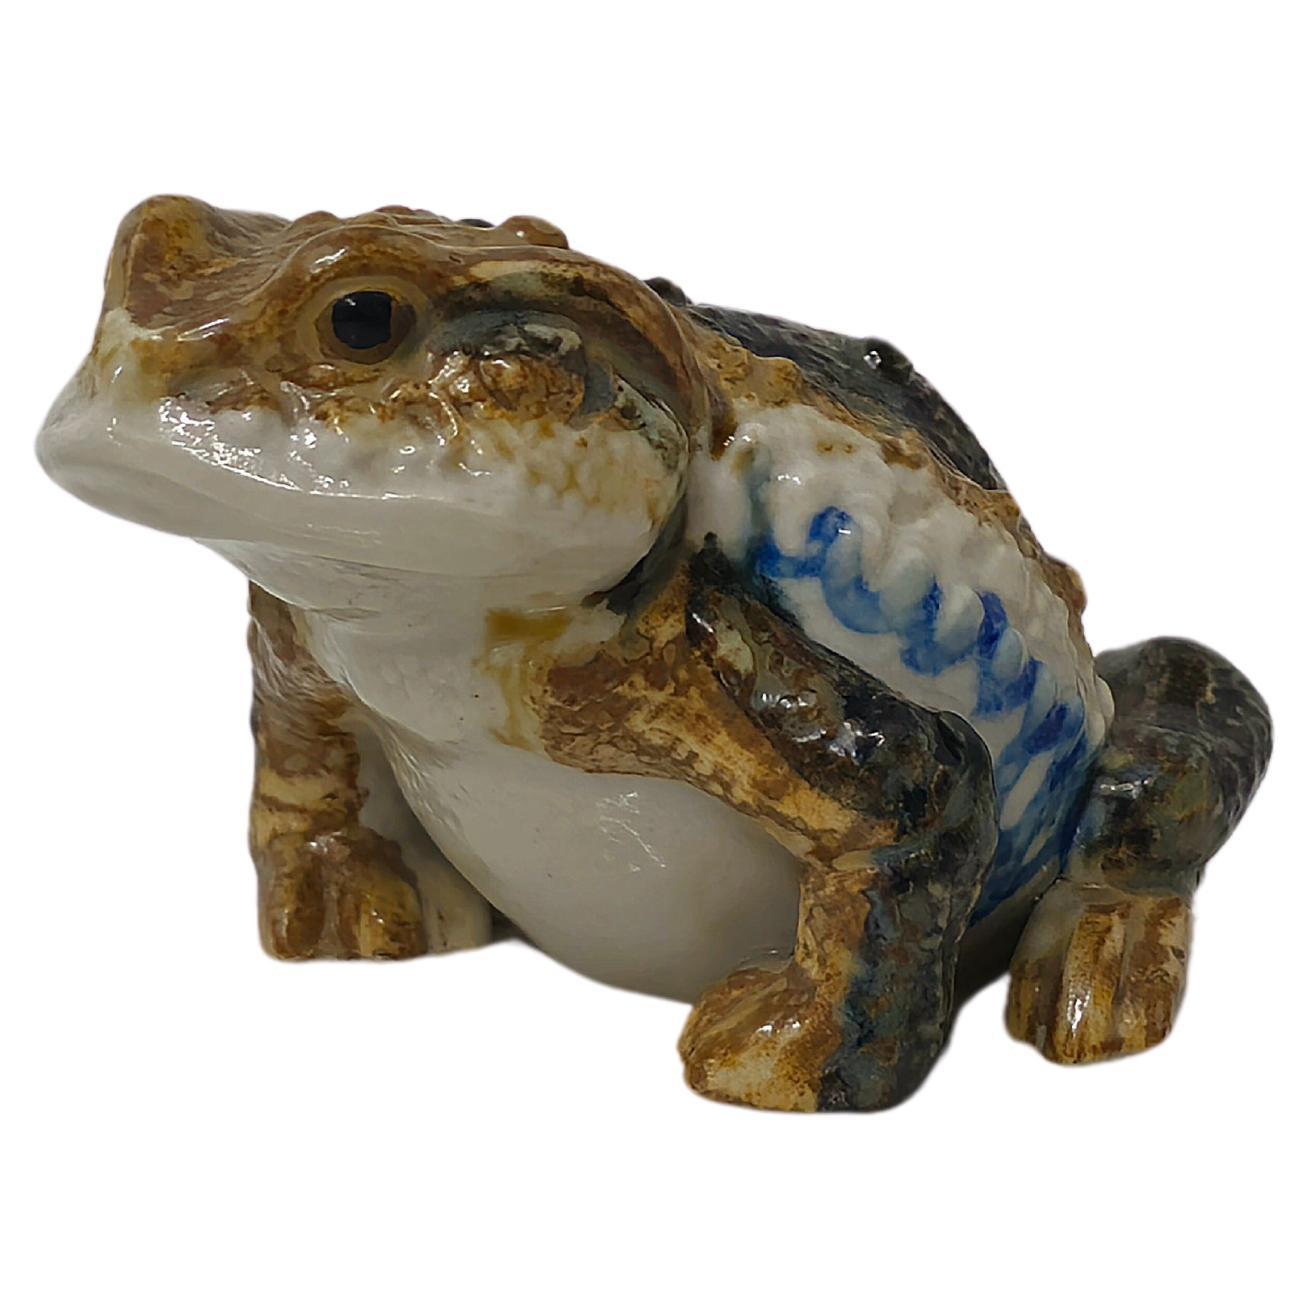  Decorative Object Animal Sculpture Frog Porcelain Midcentury Modern Italy 1960s